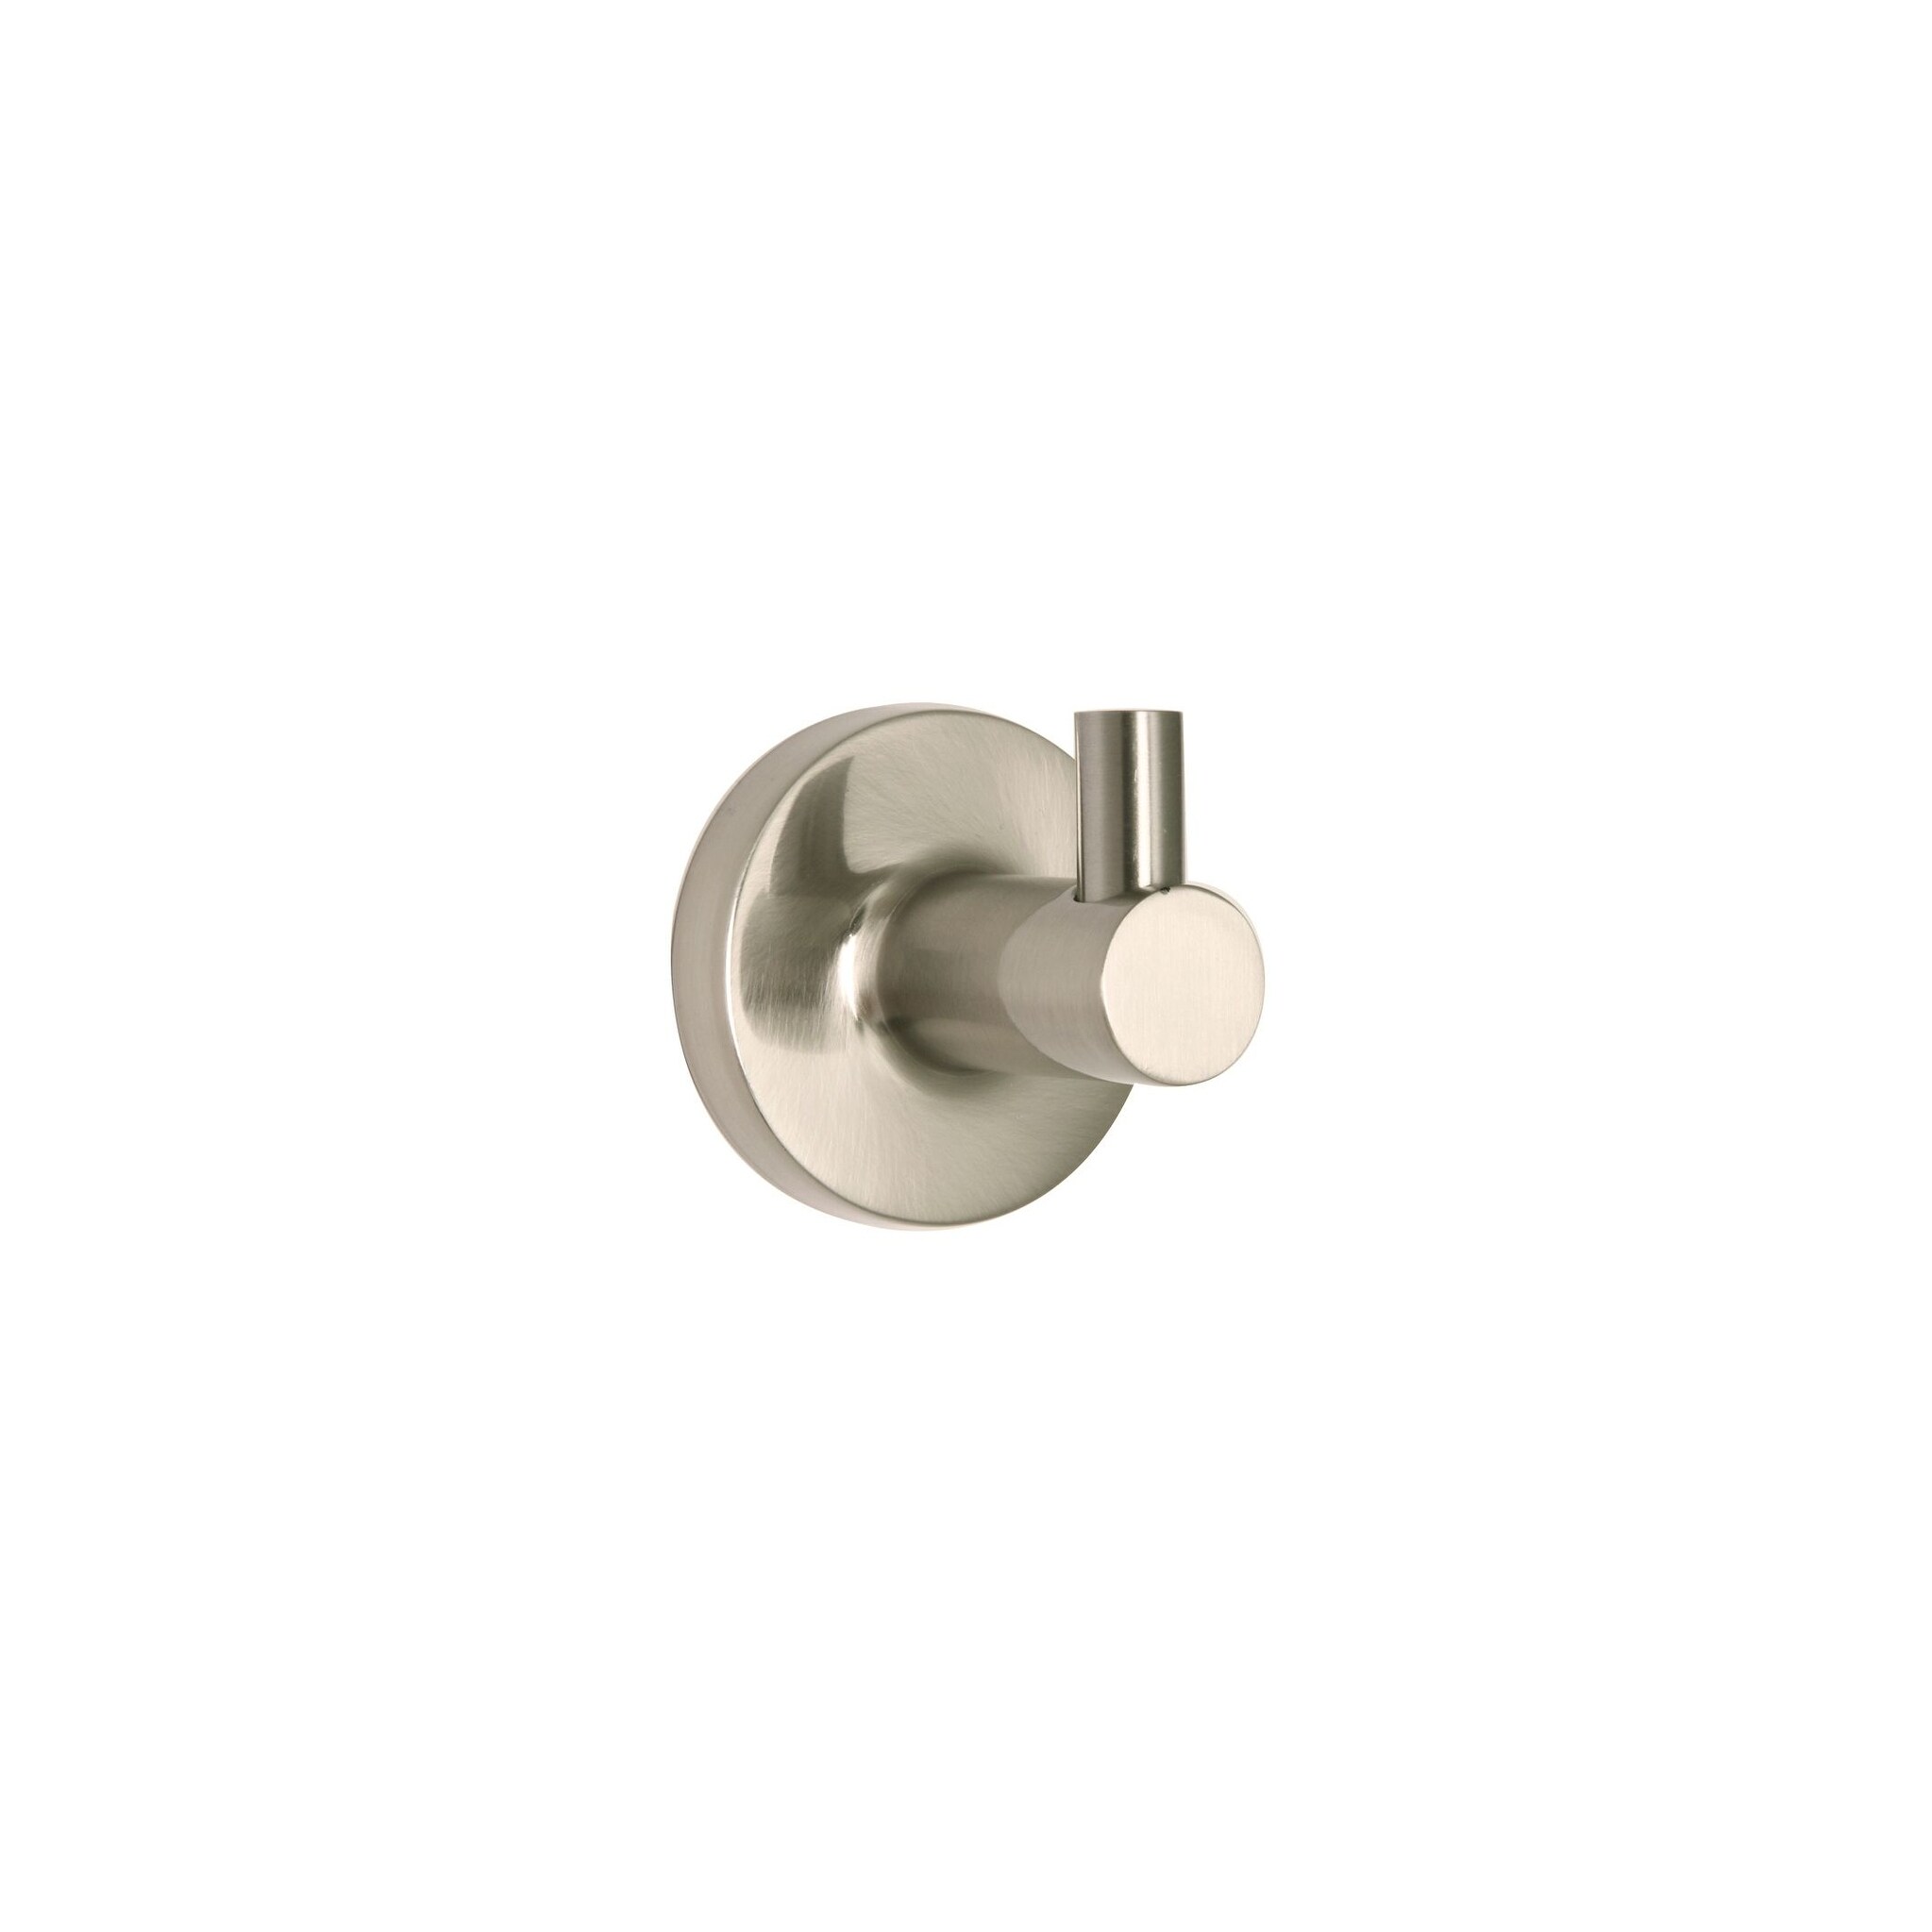 Clover Robe Hook in a Satin Nickel Finish - 8'3 x 11' - Bed Bath & Beyond  - 33699814